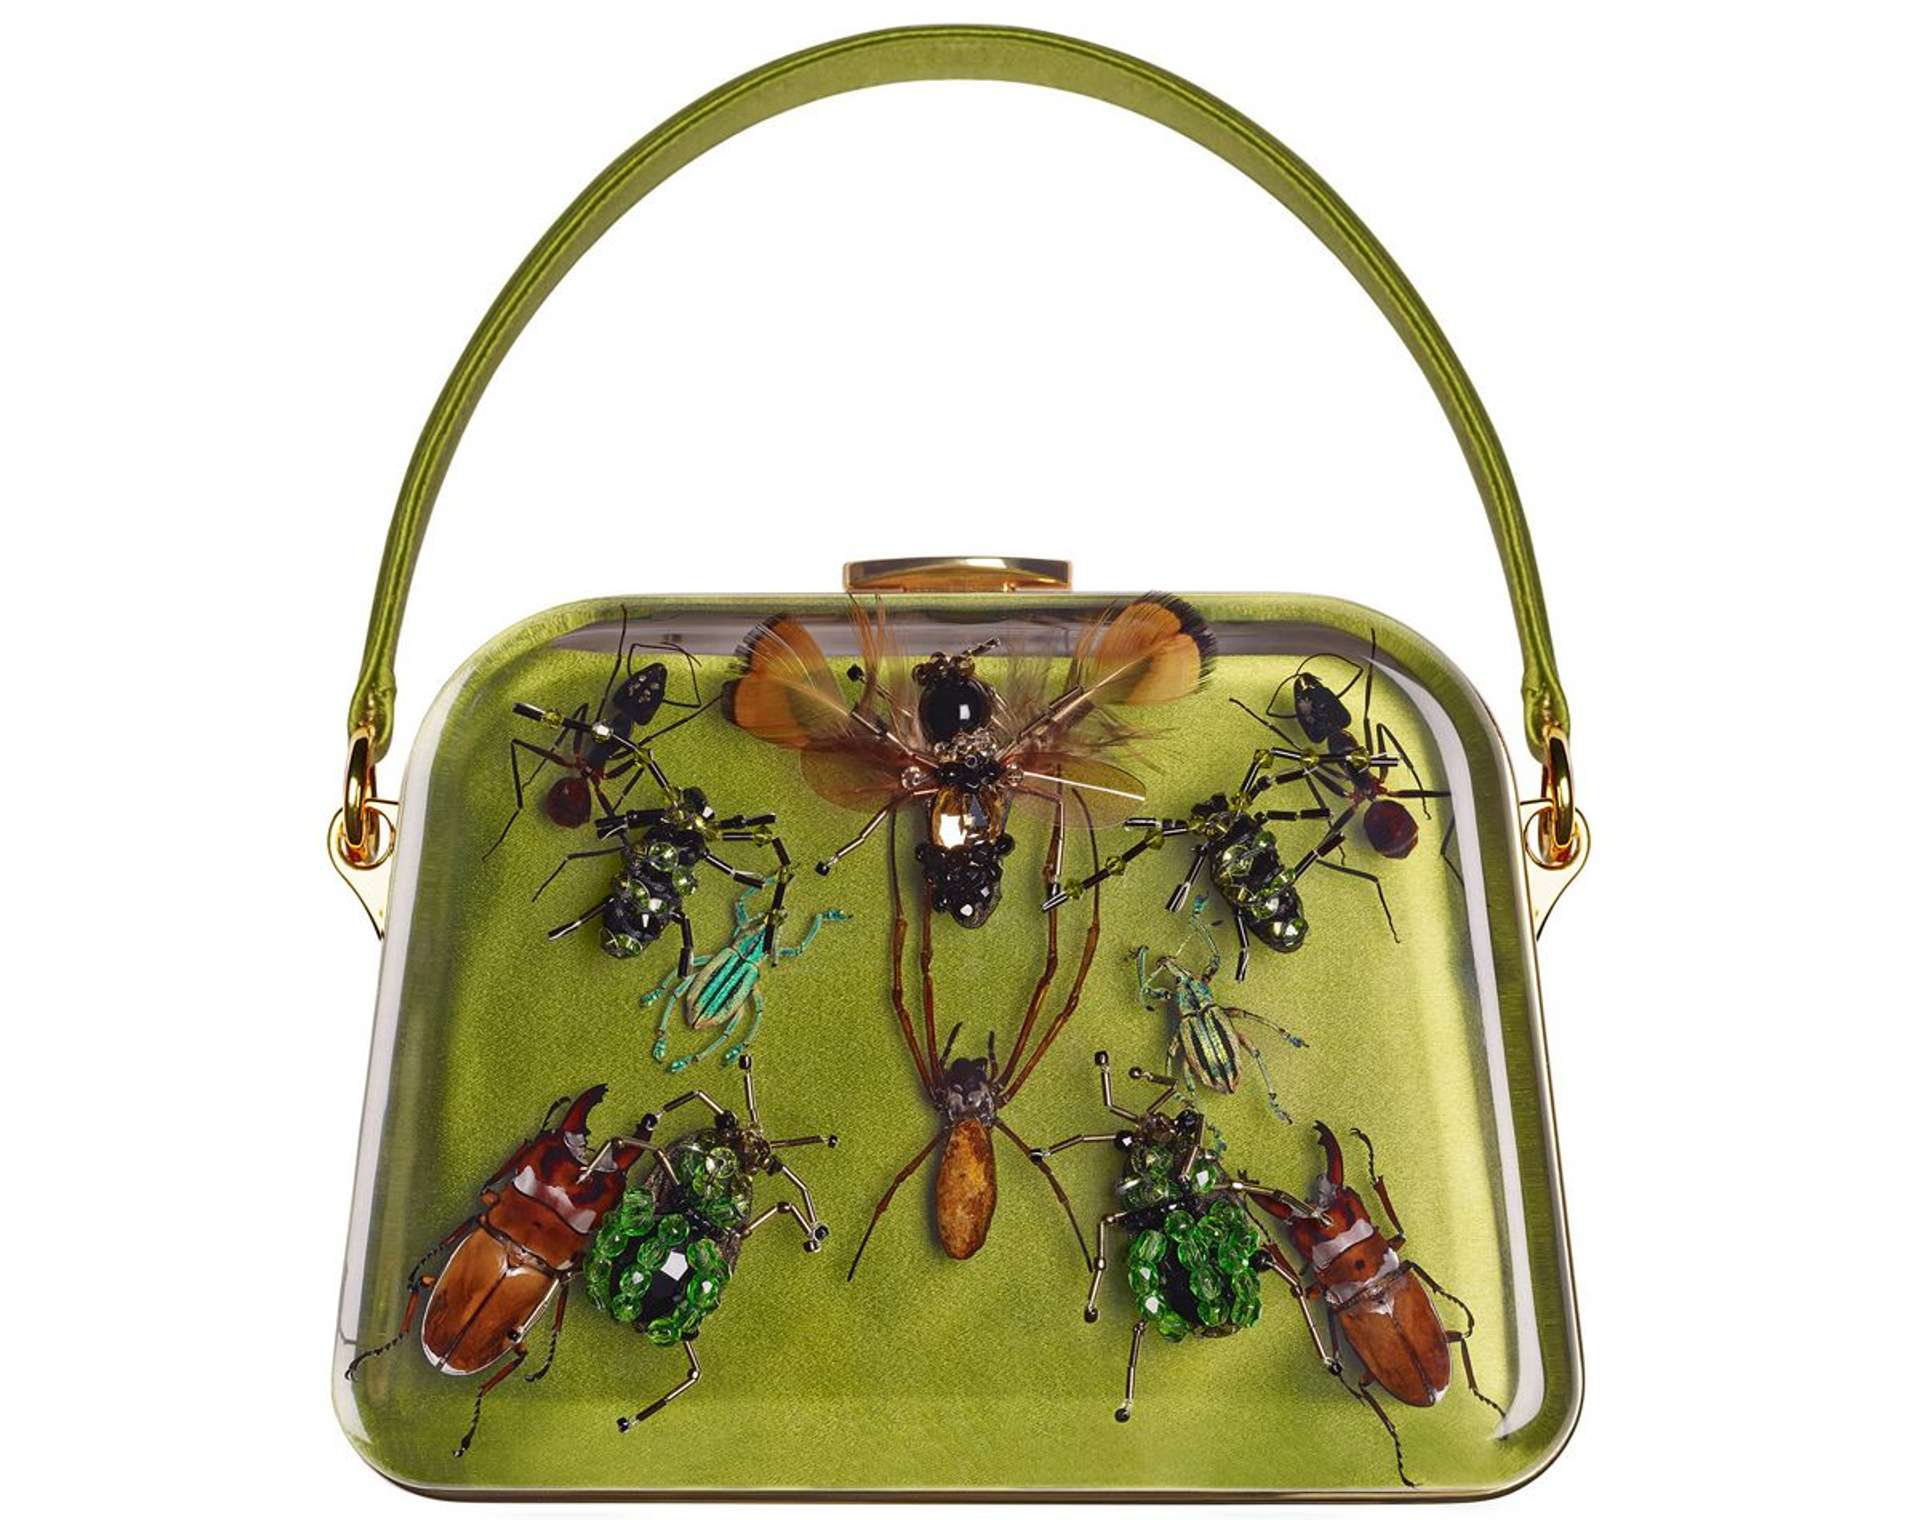 An image of a green satin bag, with embroidered insects including ants, beetles, bees and spiders. The bag was designed by Damien Hirst for Prada.